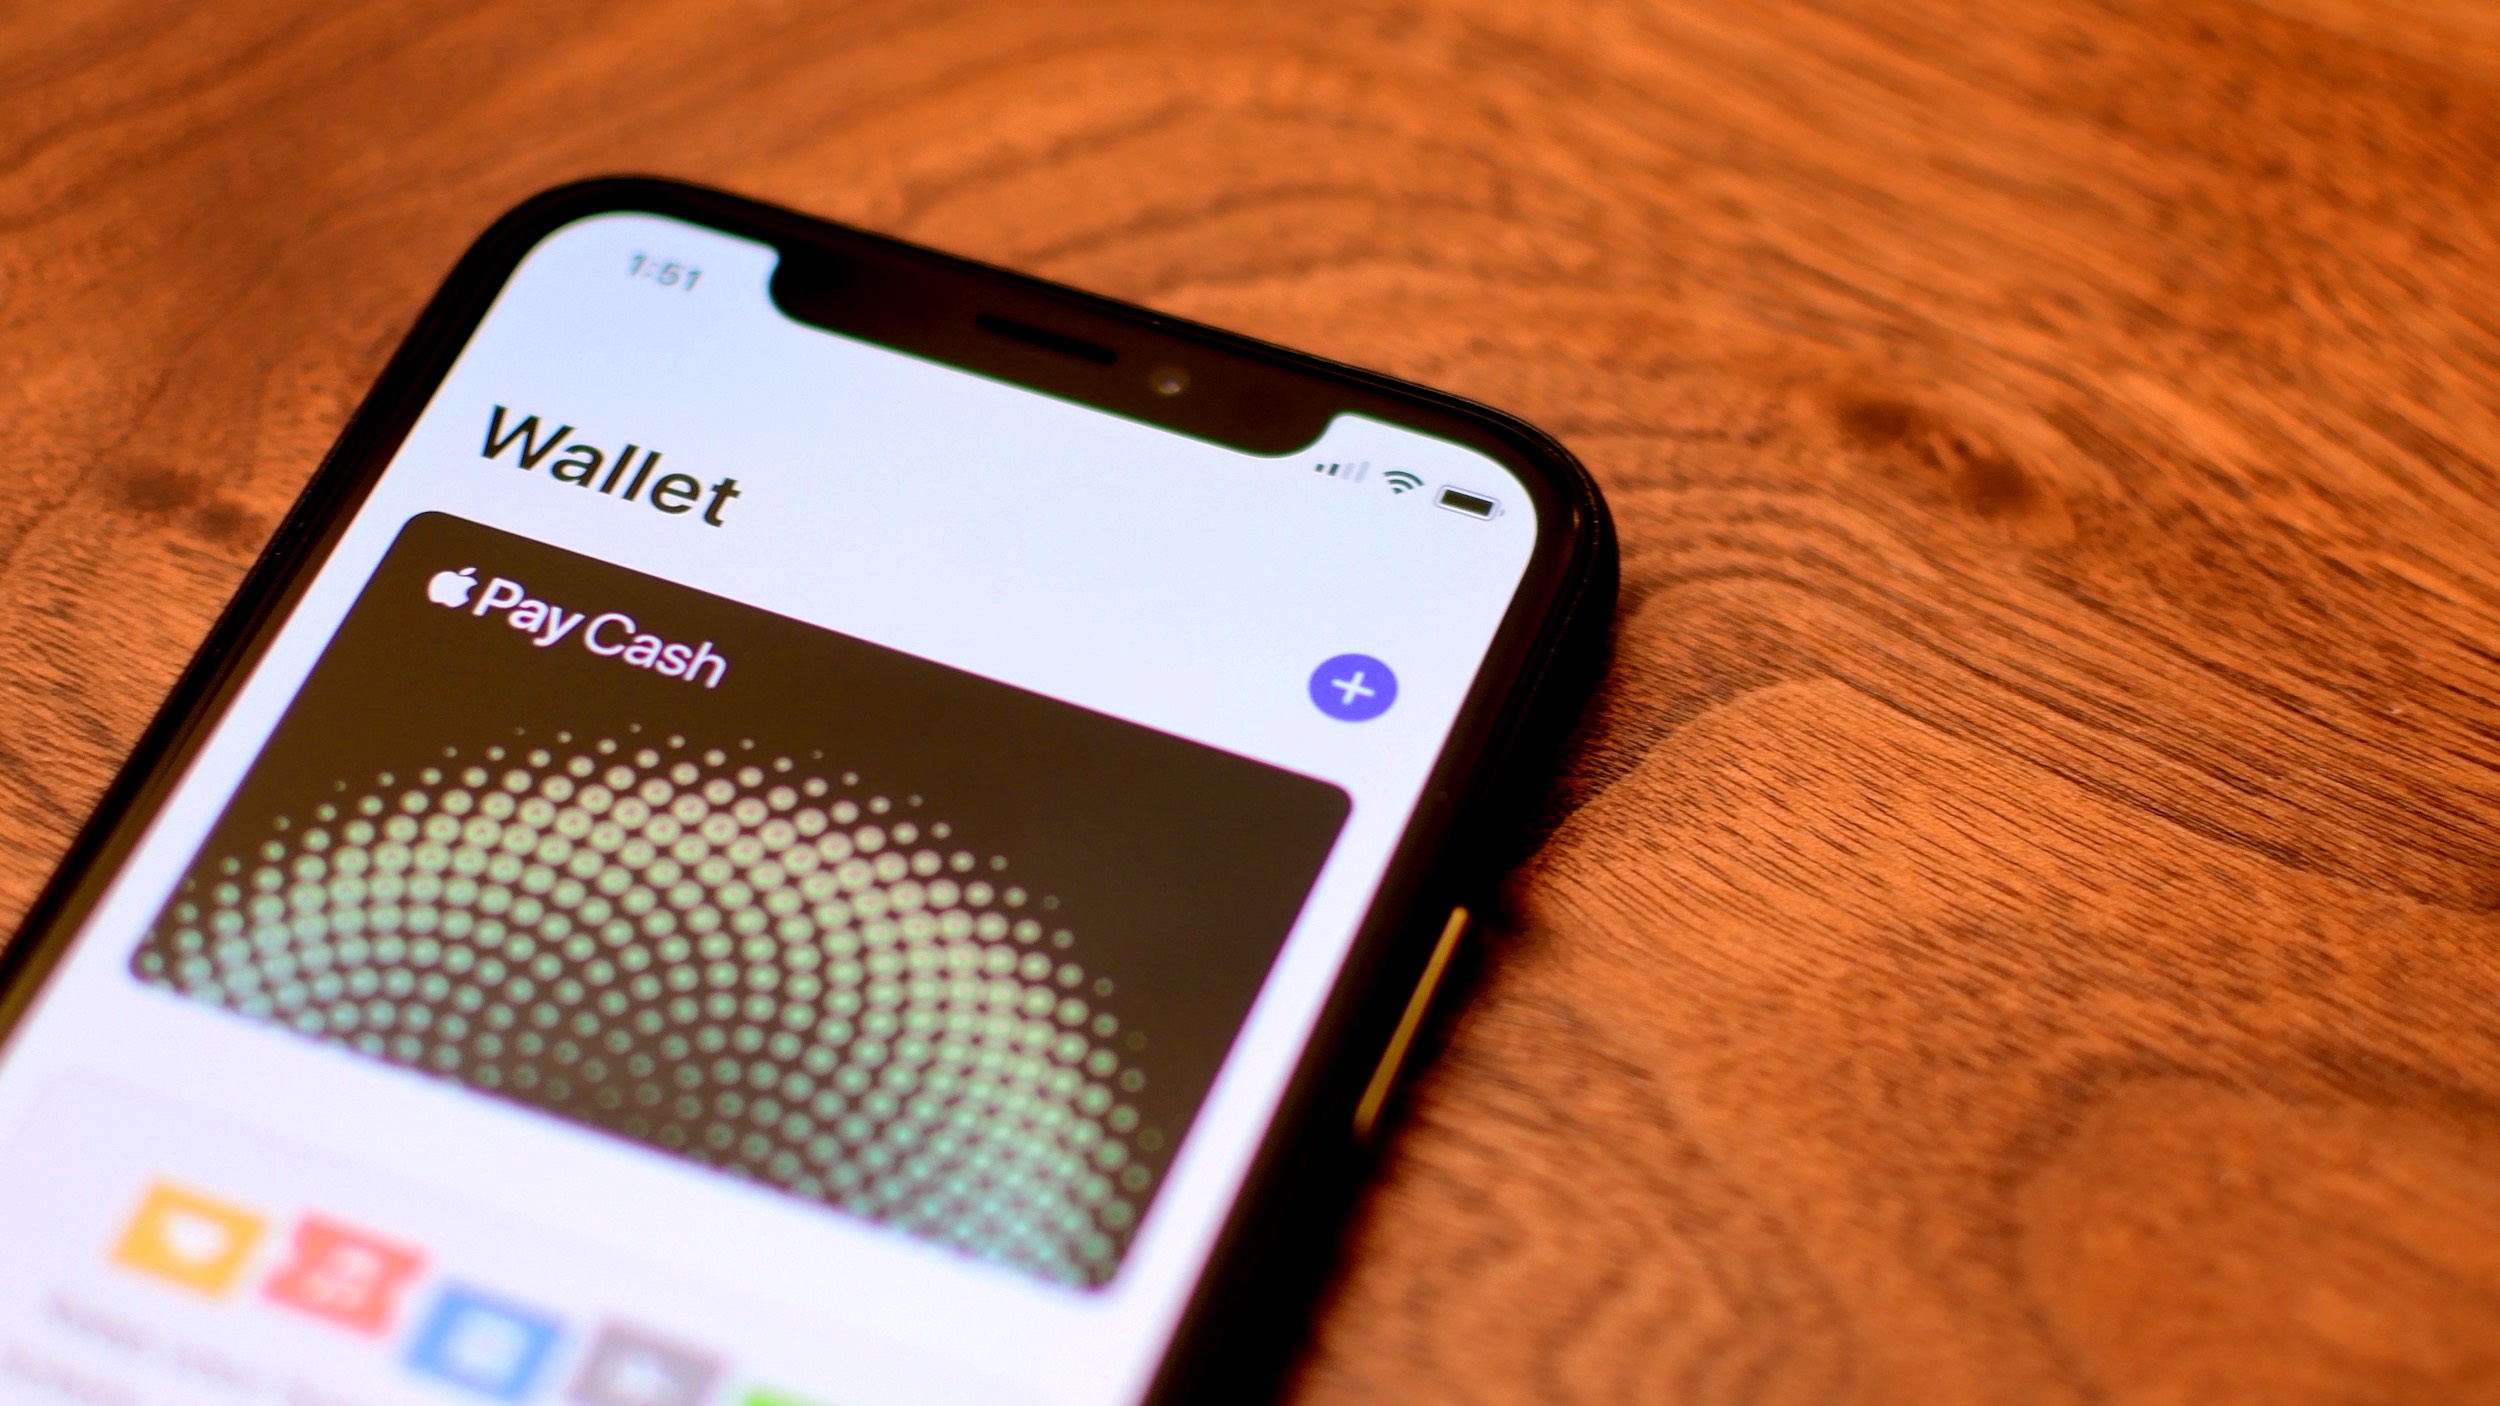 We just enabled Apple Cash Family as an allowance system